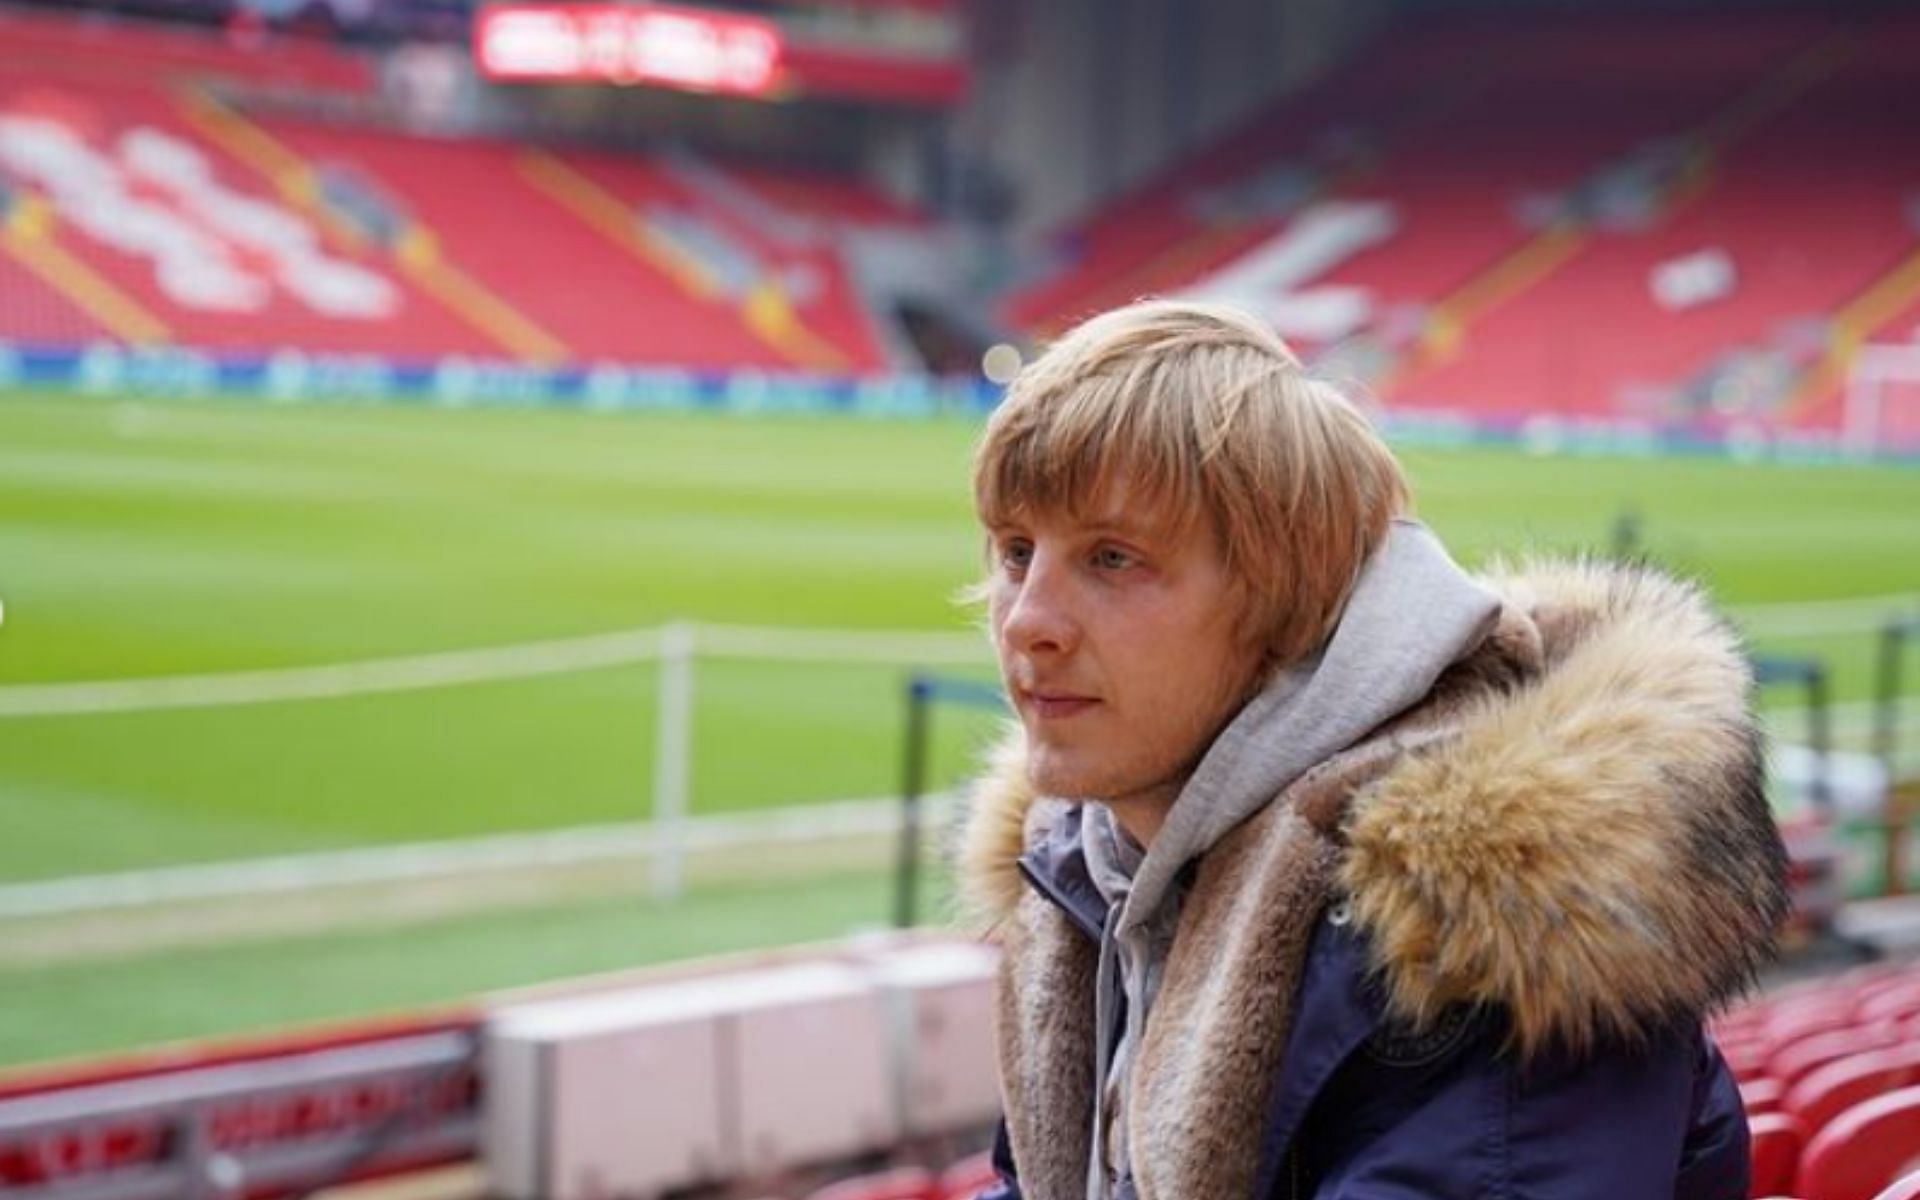 Paddy Pimblett at Anfield (Image credit: @theufcbaddy on Instagram)